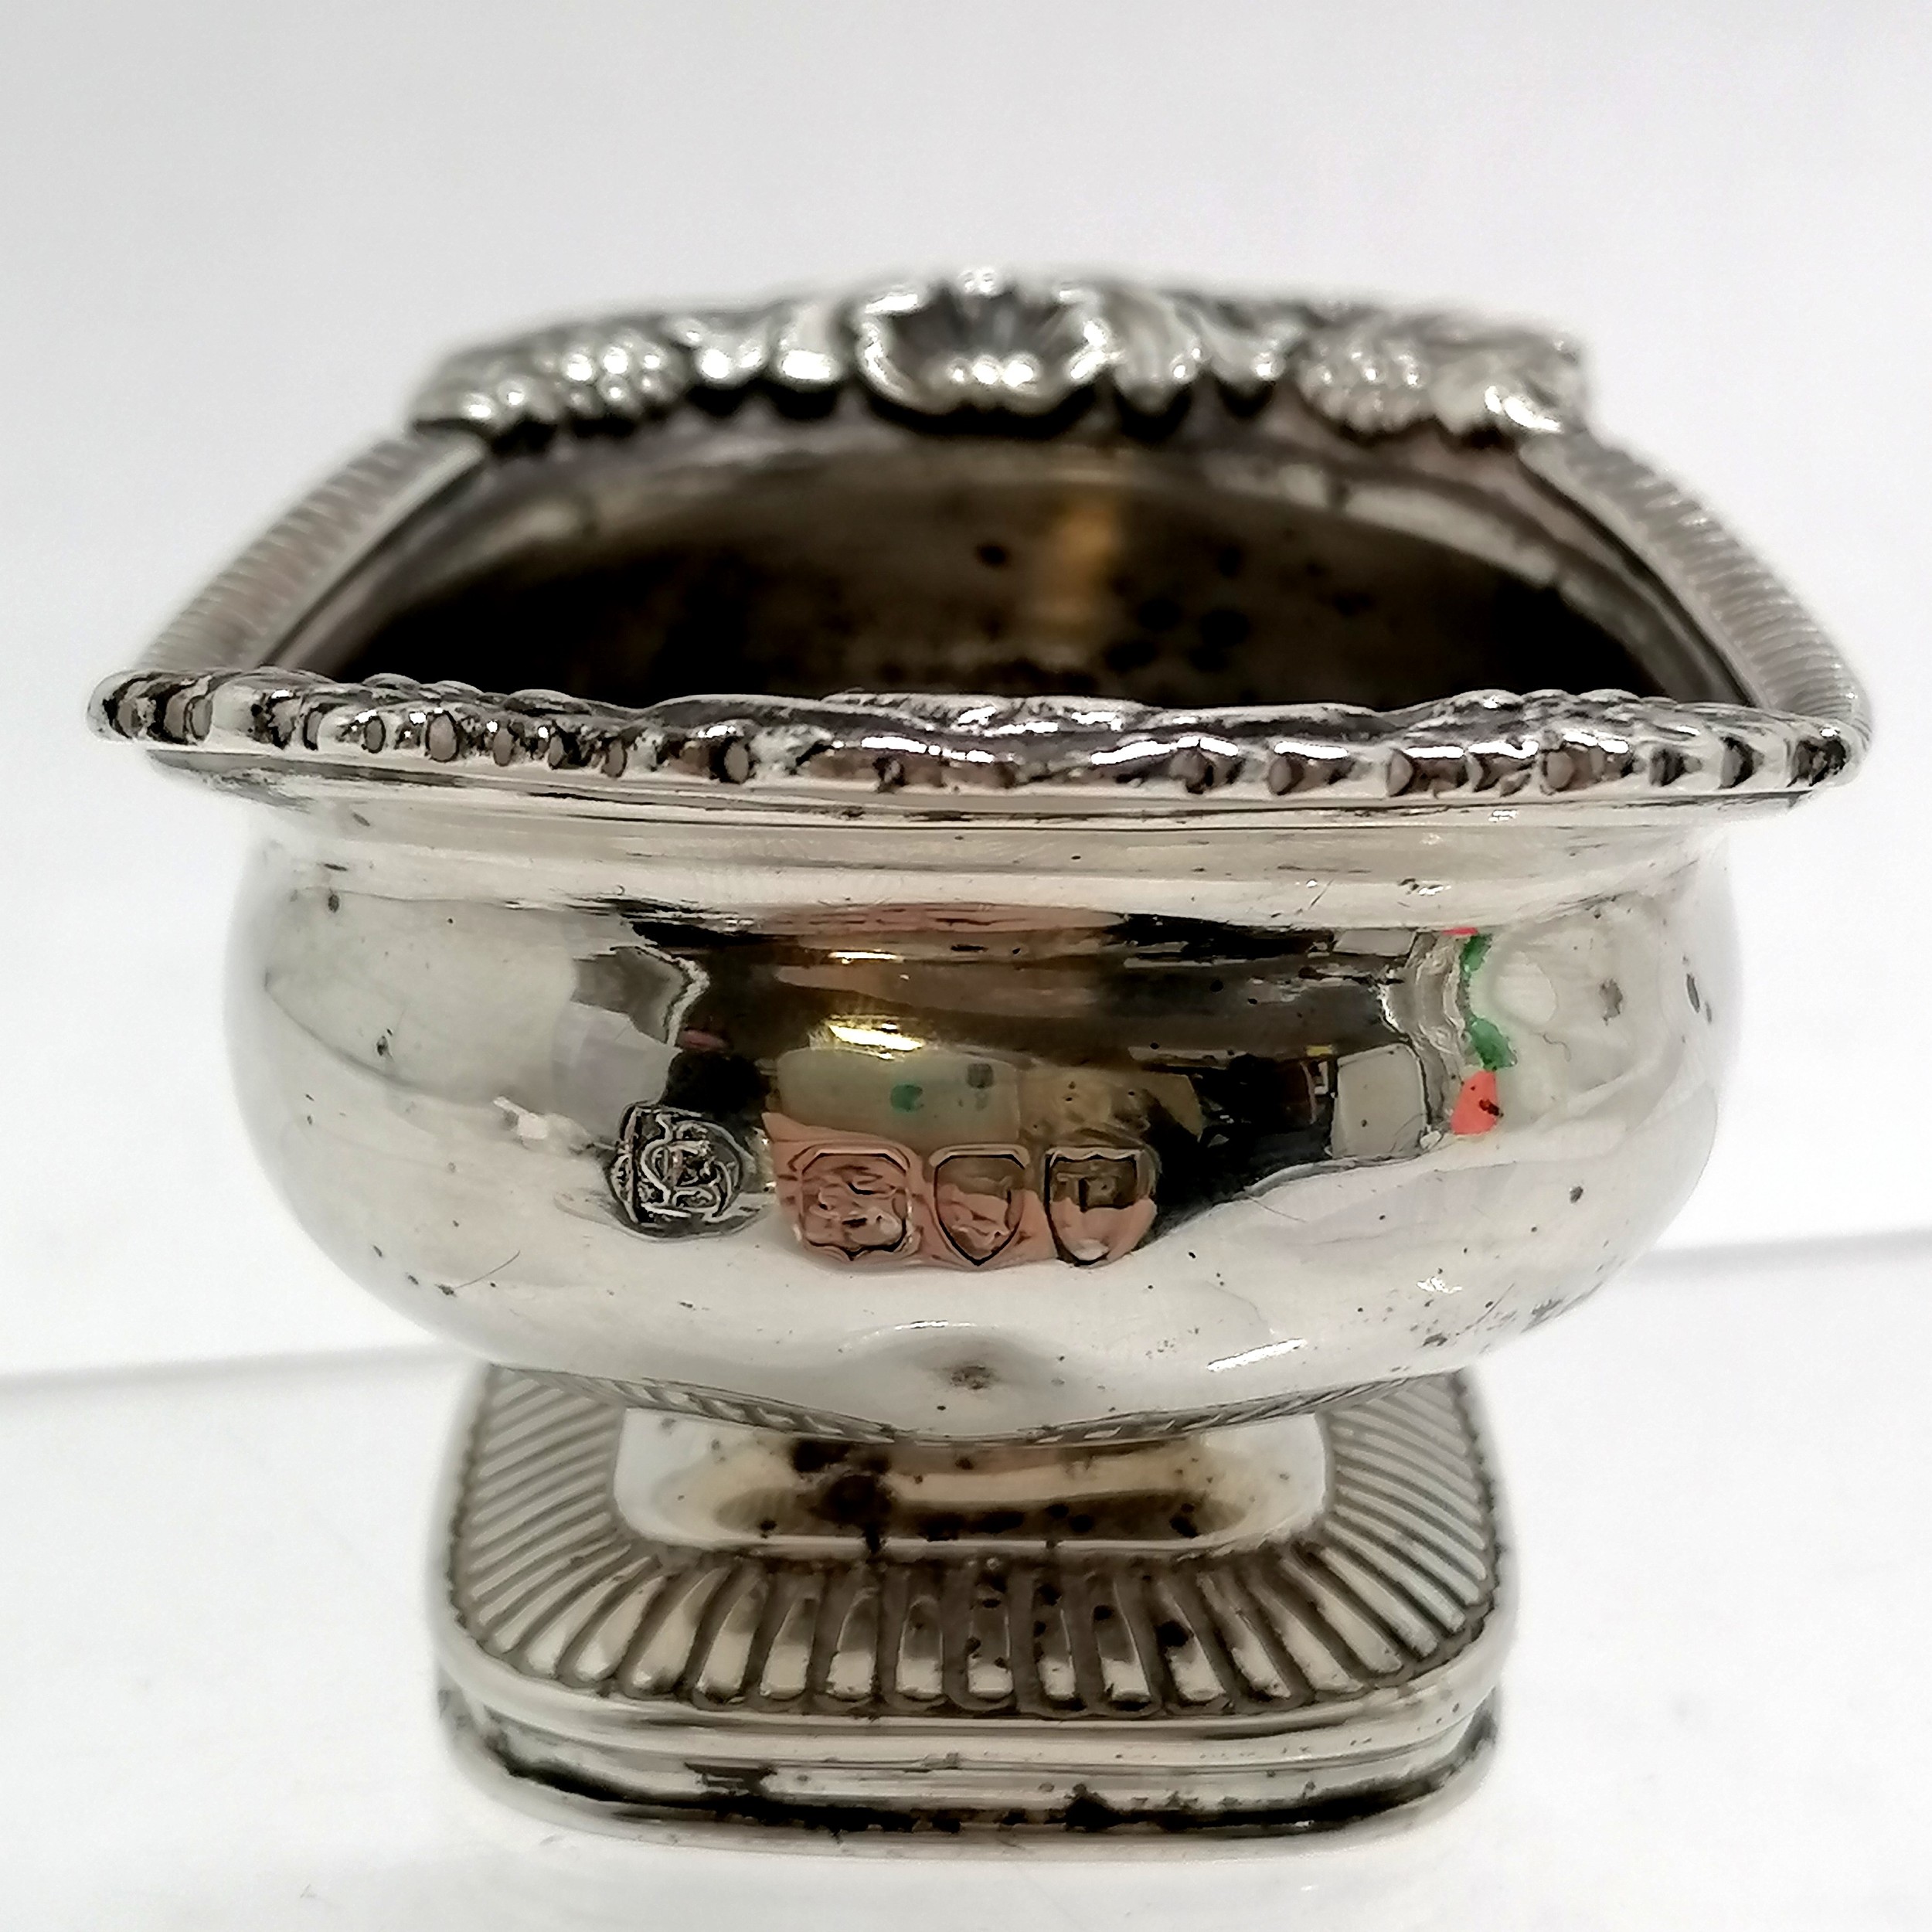 Silver salt cellar by Lambert & Co (George Lambert) with 1895 inscription Presented by Captain C B - Image 3 of 3